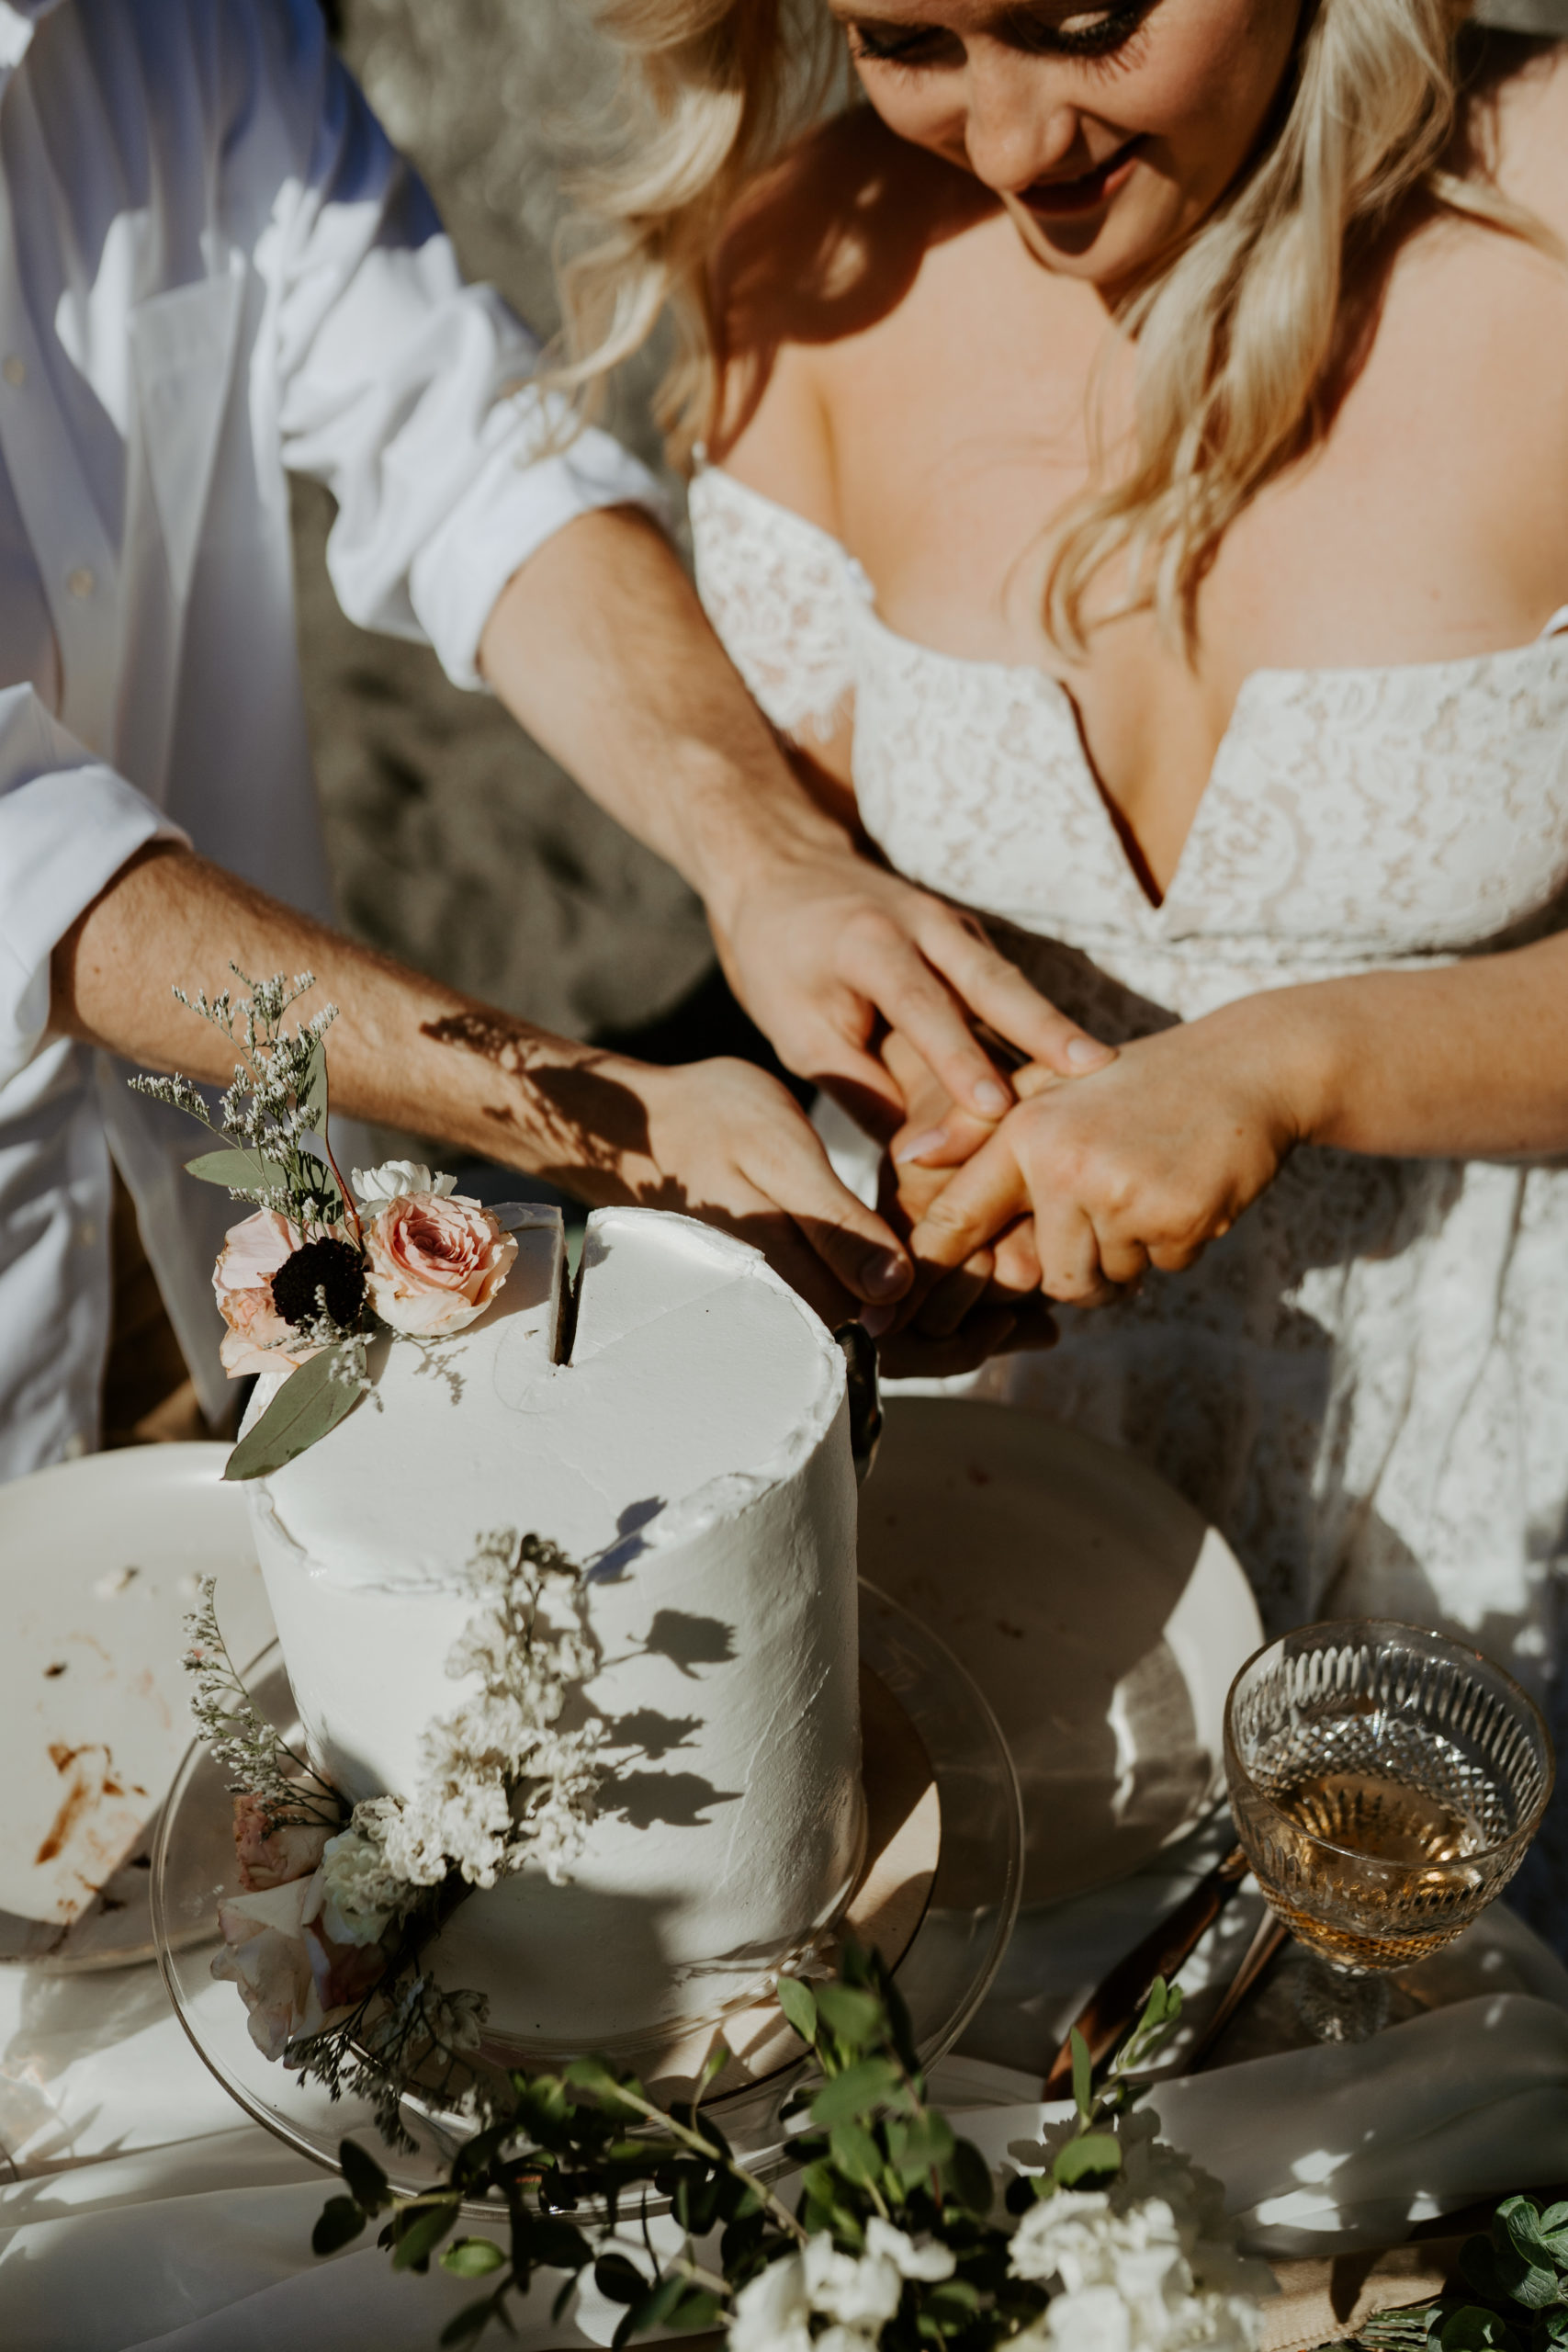 eloping couple cutting their cake at a beach picnic